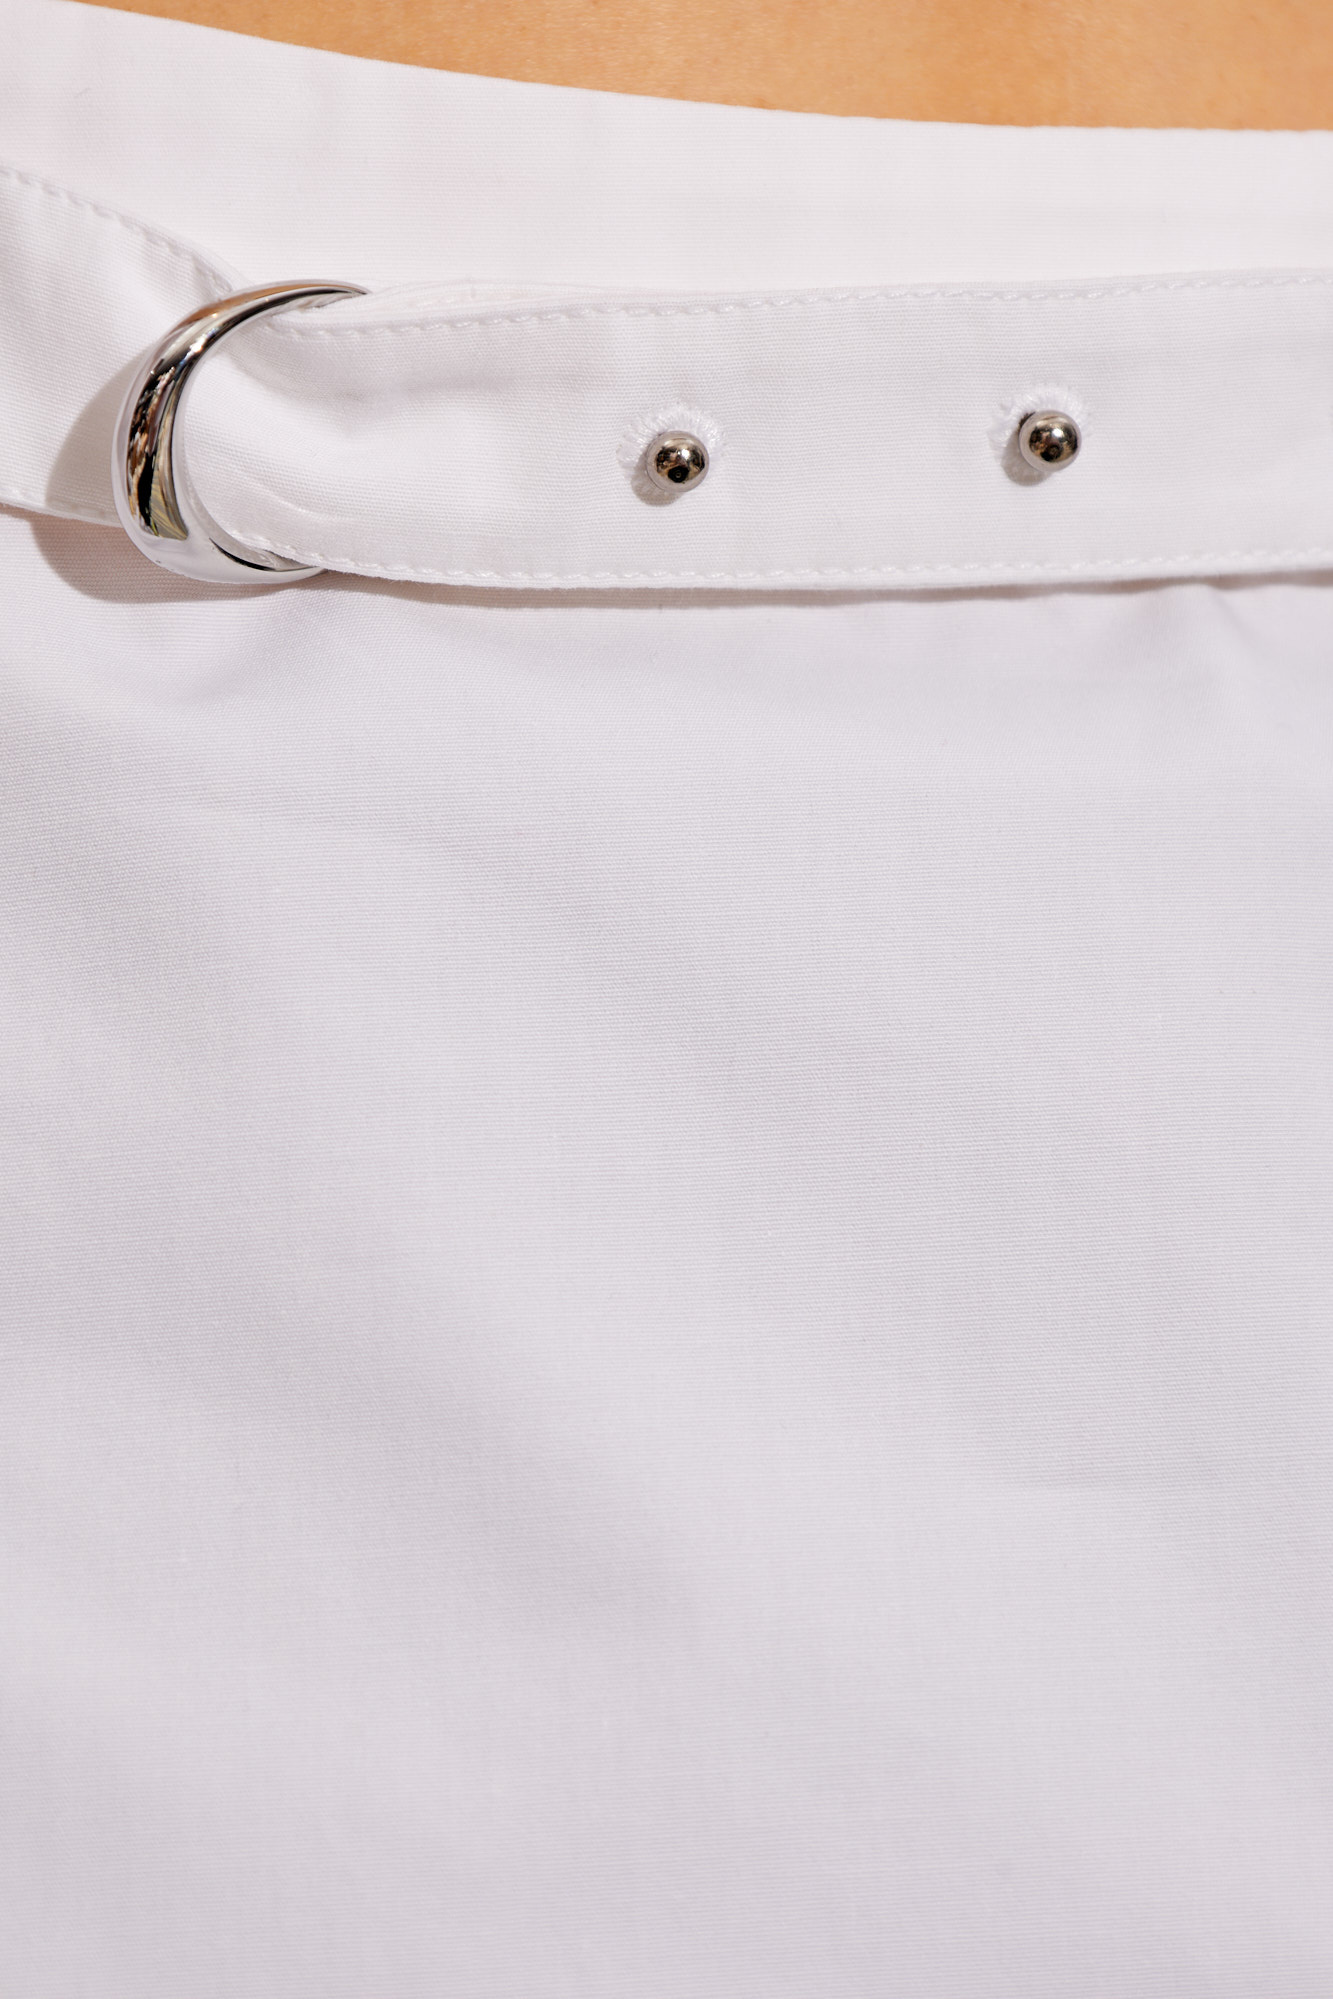 Jacquemus Cotton shirt with opening